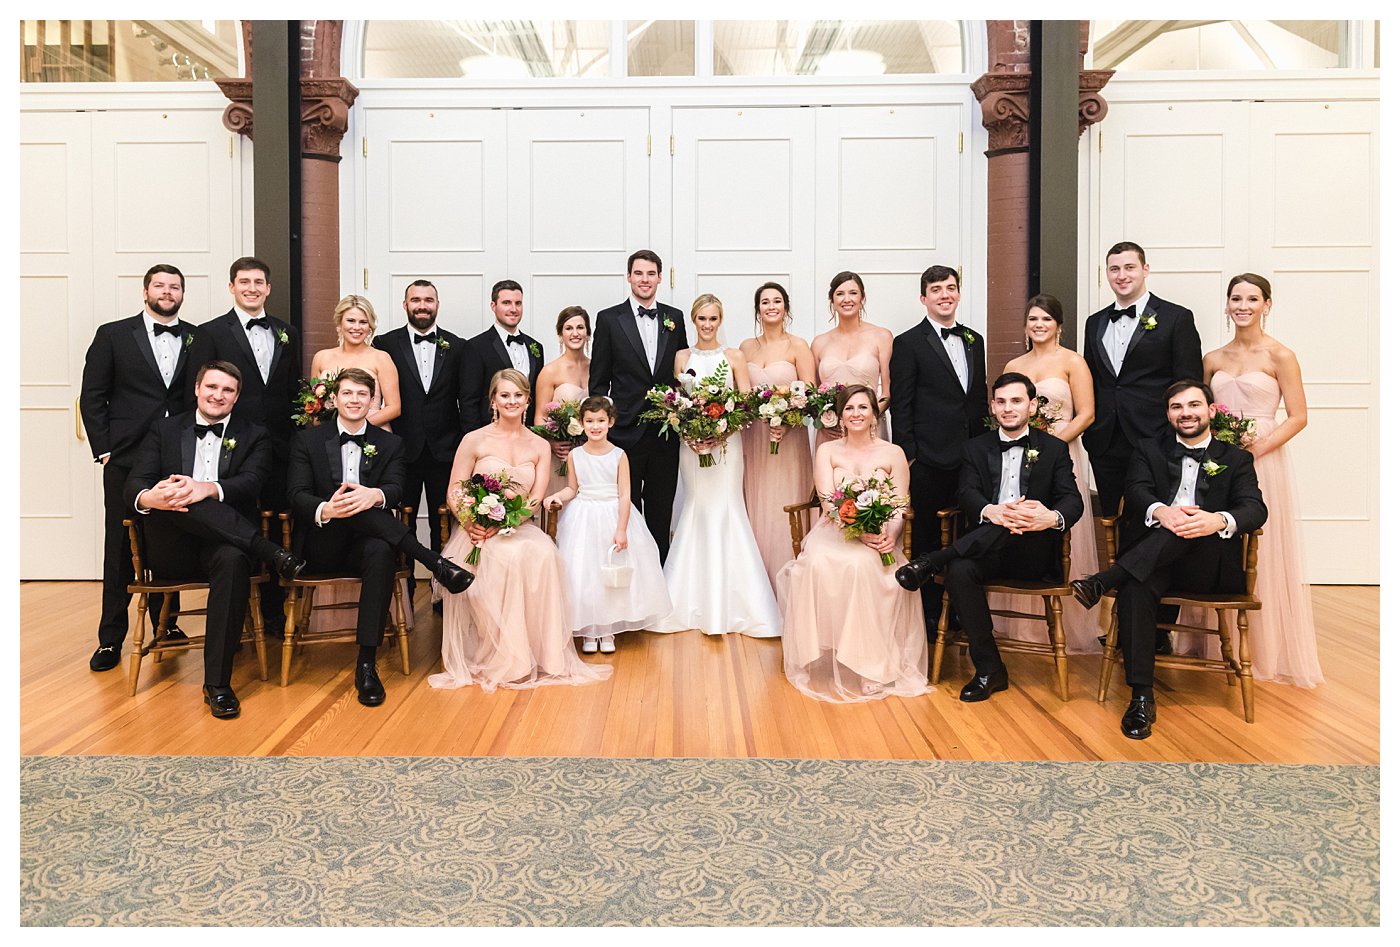 Downtown Raleigh Wedding with Blush Bridal Party